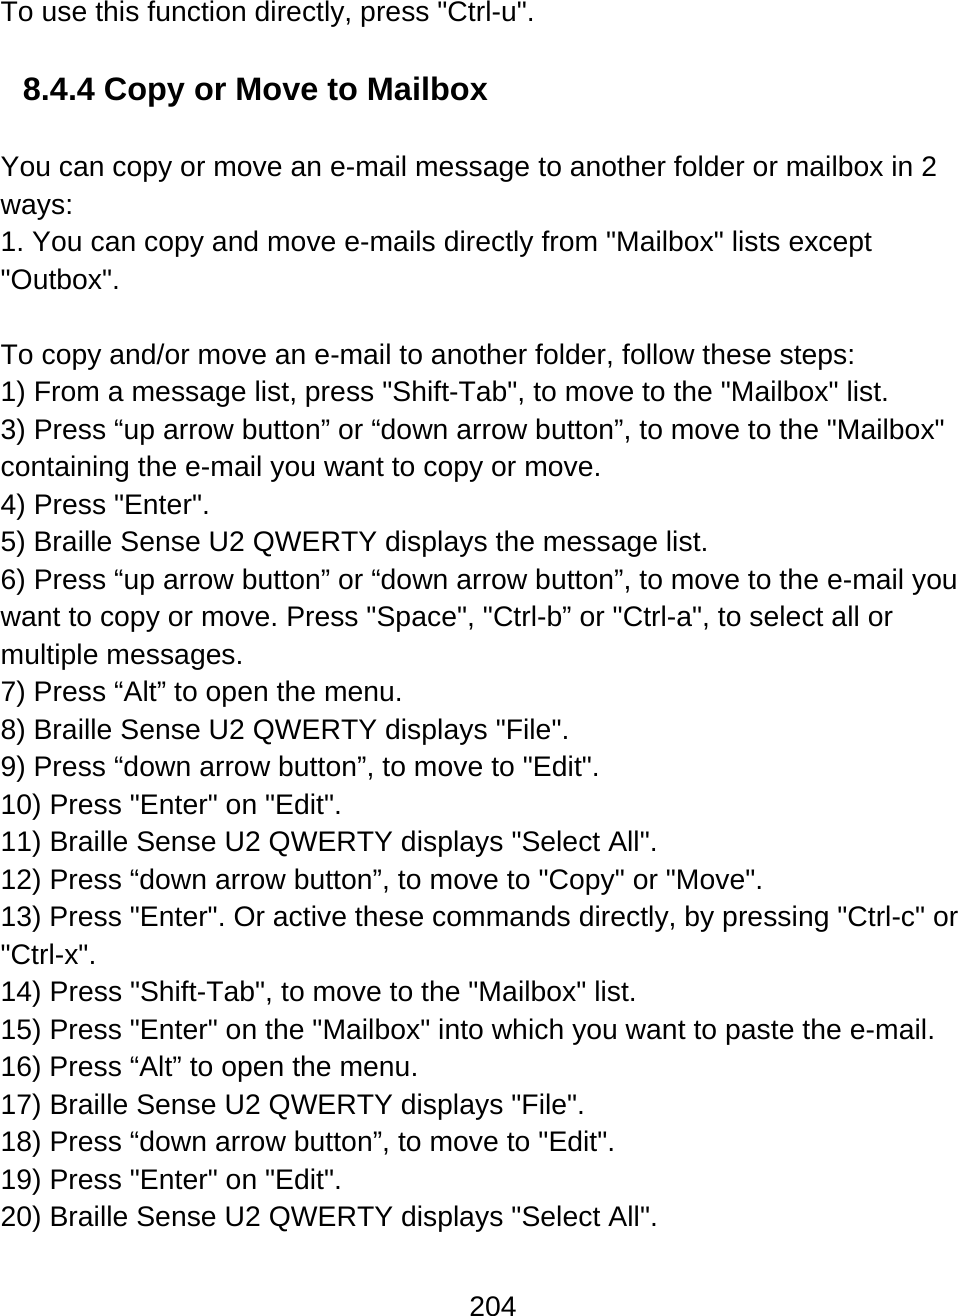 204  To use this function directly, press &quot;Ctrl-u&quot;.  8.4.4 Copy or Move to Mailbox  You can copy or move an e-mail message to another folder or mailbox in 2 ways: 1. You can copy and move e-mails directly from &quot;Mailbox&quot; lists except &quot;Outbox&quot;.  To copy and/or move an e-mail to another folder, follow these steps: 1) From a message list, press &quot;Shift-Tab&quot;, to move to the &quot;Mailbox&quot; list. 3) Press “up arrow button” or “down arrow button”, to move to the &quot;Mailbox&quot; containing the e-mail you want to copy or move. 4) Press &quot;Enter&quot;. 5) Braille Sense U2 QWERTY displays the message list. 6) Press “up arrow button” or “down arrow button”, to move to the e-mail you want to copy or move. Press &quot;Space&quot;, &quot;Ctrl-b” or &quot;Ctrl-a&quot;, to select all or multiple messages.  7) Press “Alt” to open the menu.  8) Braille Sense U2 QWERTY displays &quot;File&quot;. 9) Press “down arrow button”, to move to &quot;Edit&quot;. 10) Press &quot;Enter&quot; on &quot;Edit&quot;. 11) Braille Sense U2 QWERTY displays &quot;Select All&quot;. 12) Press “down arrow button”, to move to &quot;Copy&quot; or &quot;Move&quot;.  13) Press &quot;Enter&quot;. Or active these commands directly, by pressing &quot;Ctrl-c&quot; or &quot;Ctrl-x&quot;.  14) Press &quot;Shift-Tab&quot;, to move to the &quot;Mailbox&quot; list. 15) Press &quot;Enter&quot; on the &quot;Mailbox&quot; into which you want to paste the e-mail. 16) Press “Alt” to open the menu. 17) Braille Sense U2 QWERTY displays &quot;File&quot;. 18) Press “down arrow button”, to move to &quot;Edit&quot;. 19) Press &quot;Enter&quot; on &quot;Edit&quot;. 20) Braille Sense U2 QWERTY displays &quot;Select All&quot;. 